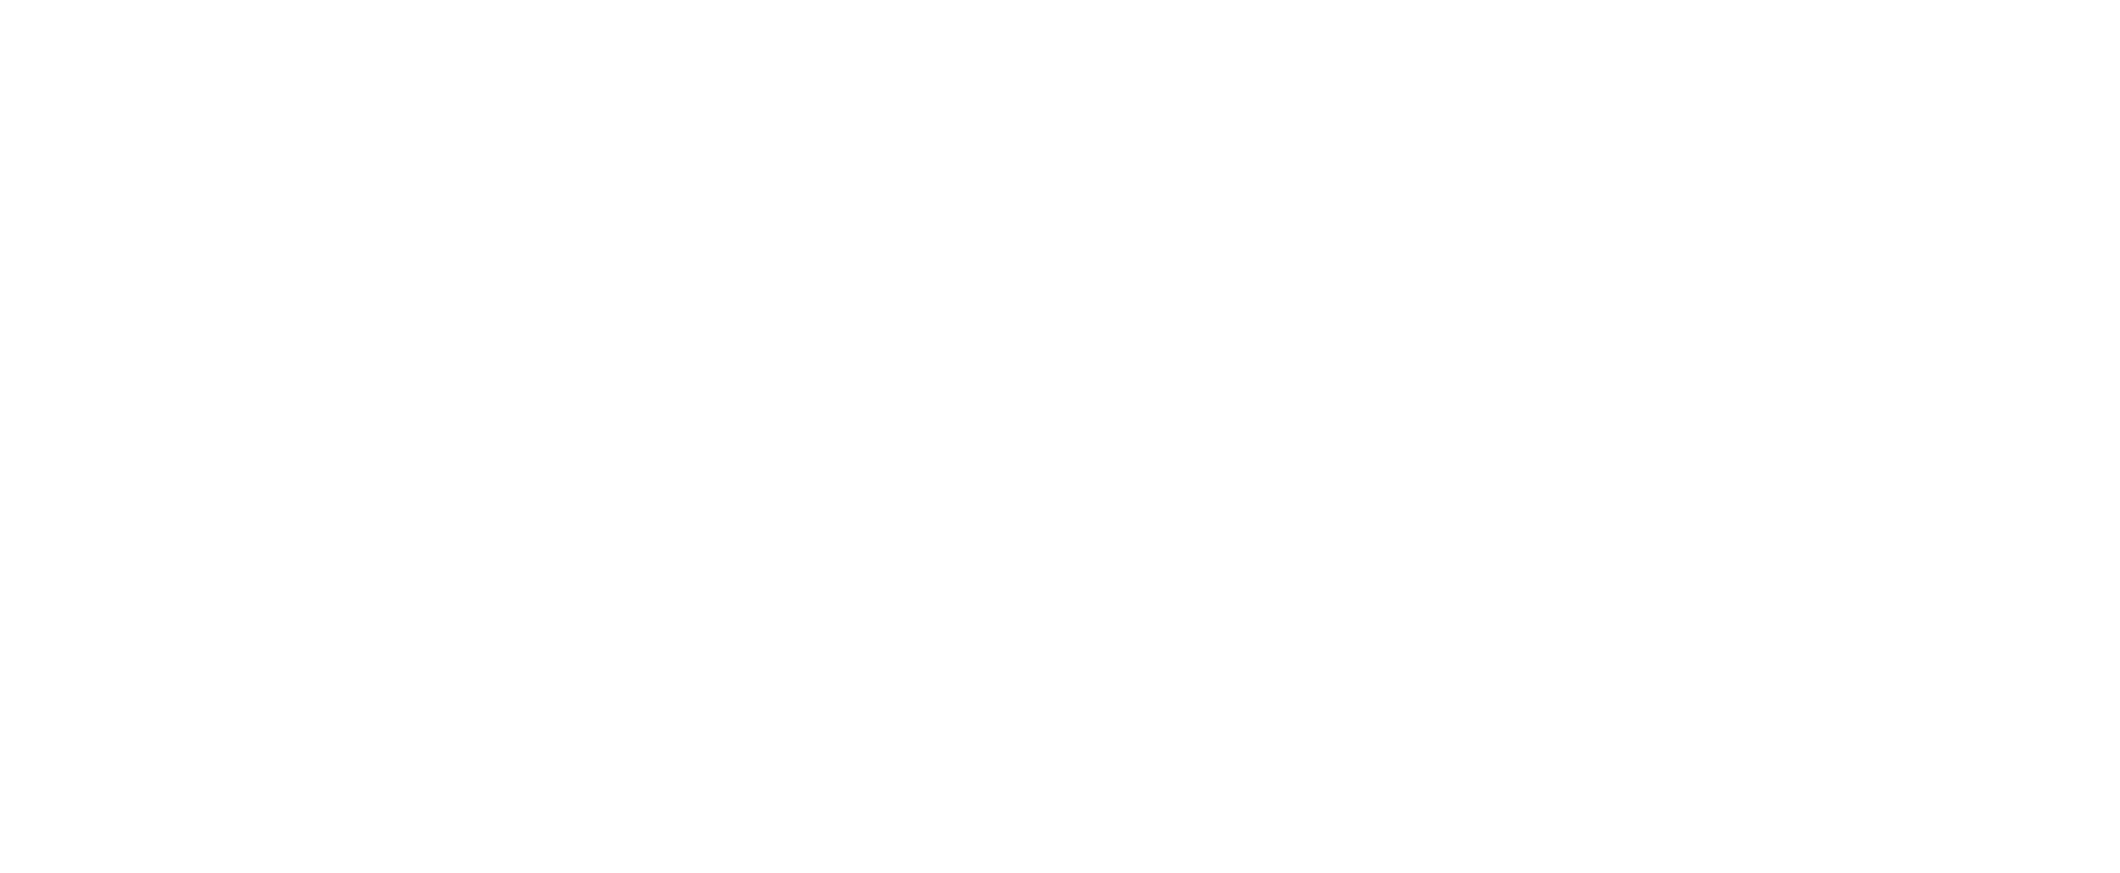 Watch BT Sport on PlayStation, Xbox, Fire TV, Android TV, NOW TV and more